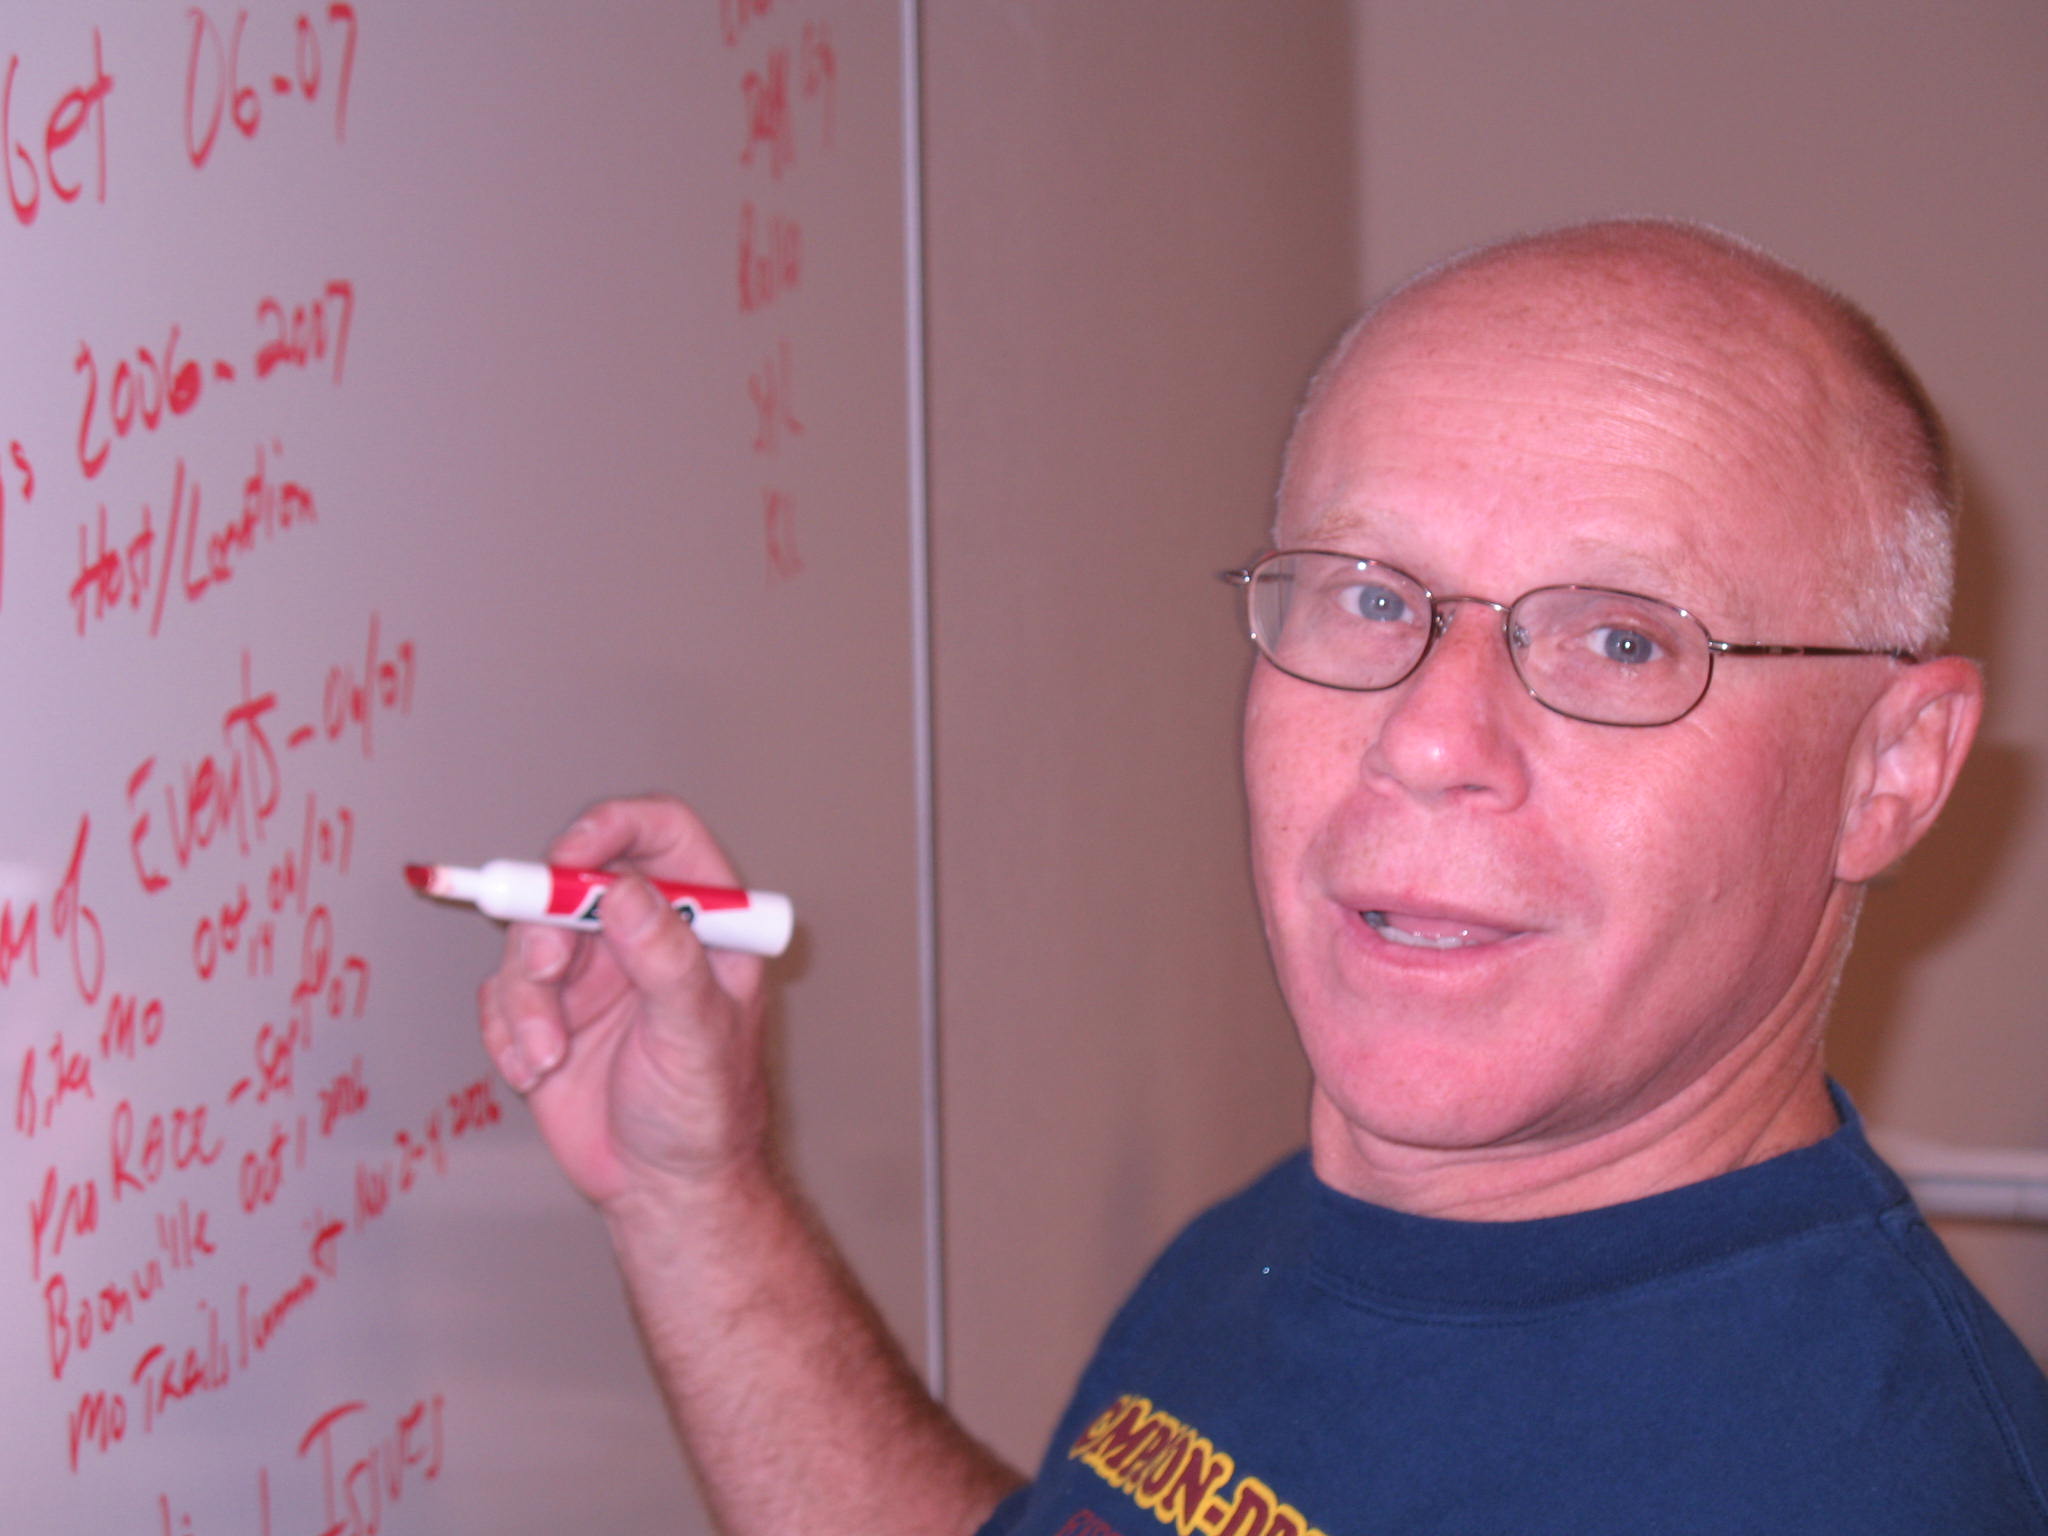 a man in blue shirt writing on a whiteboard